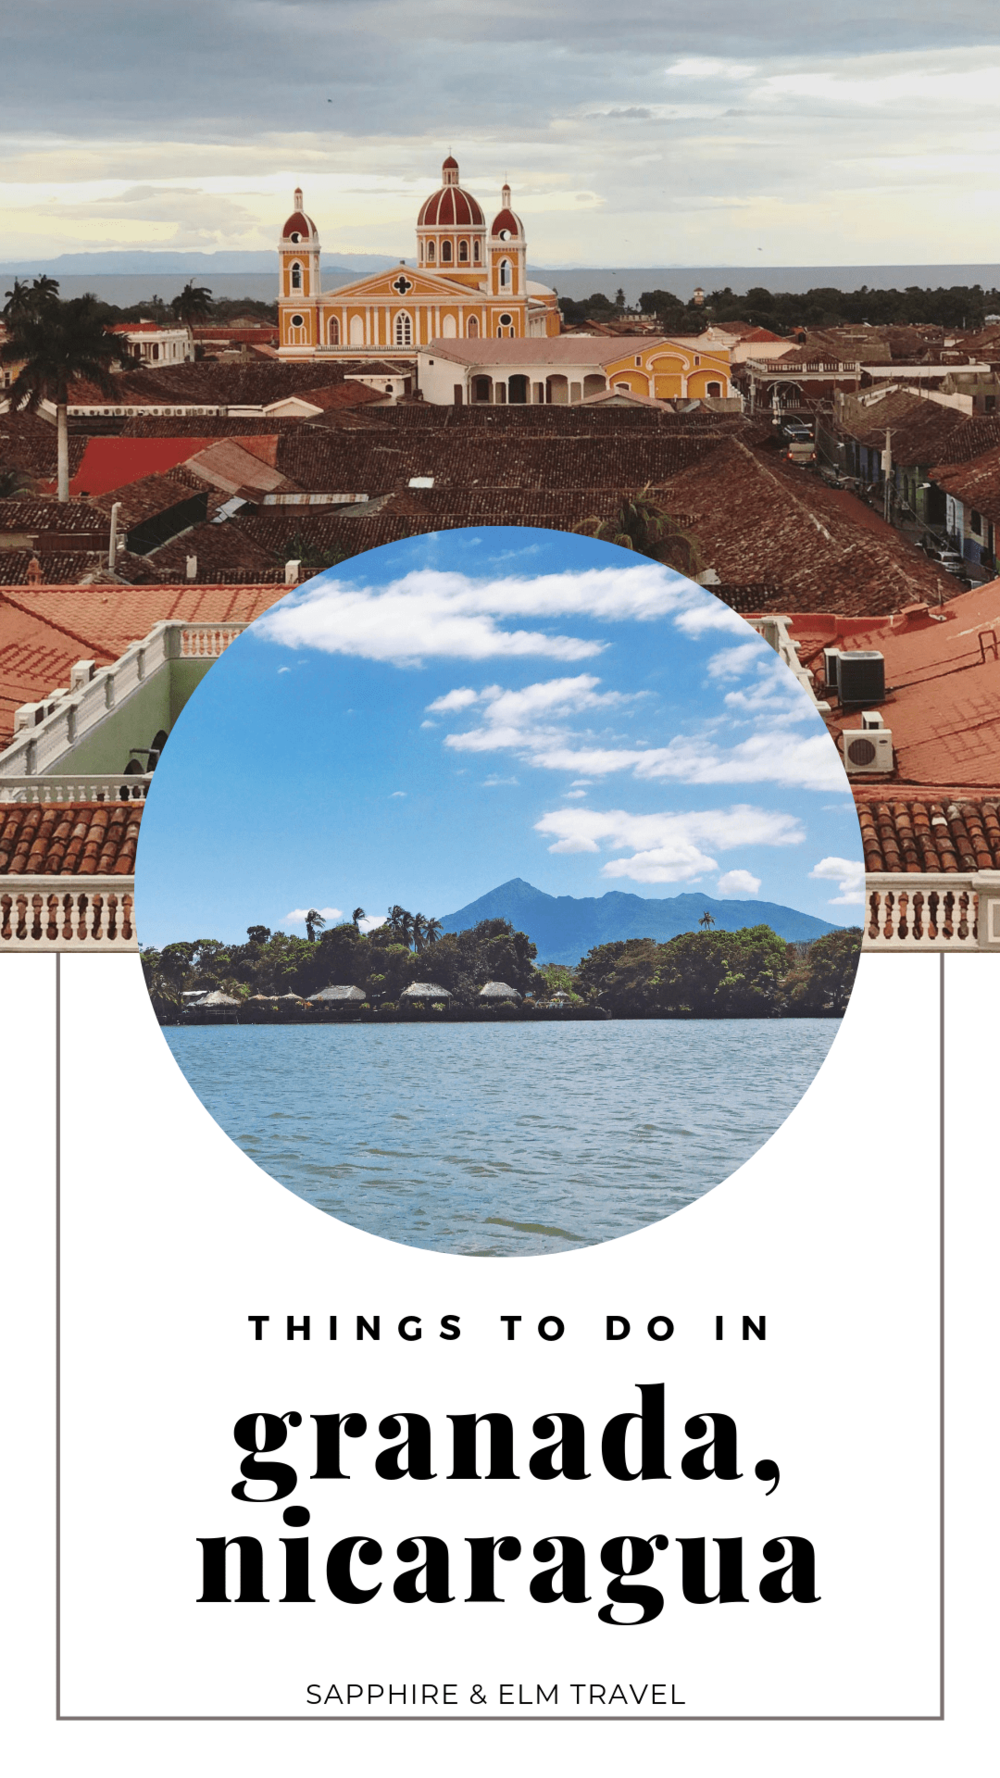 Things to do in Granada Nicaragua | Sapphire & Elm Travel